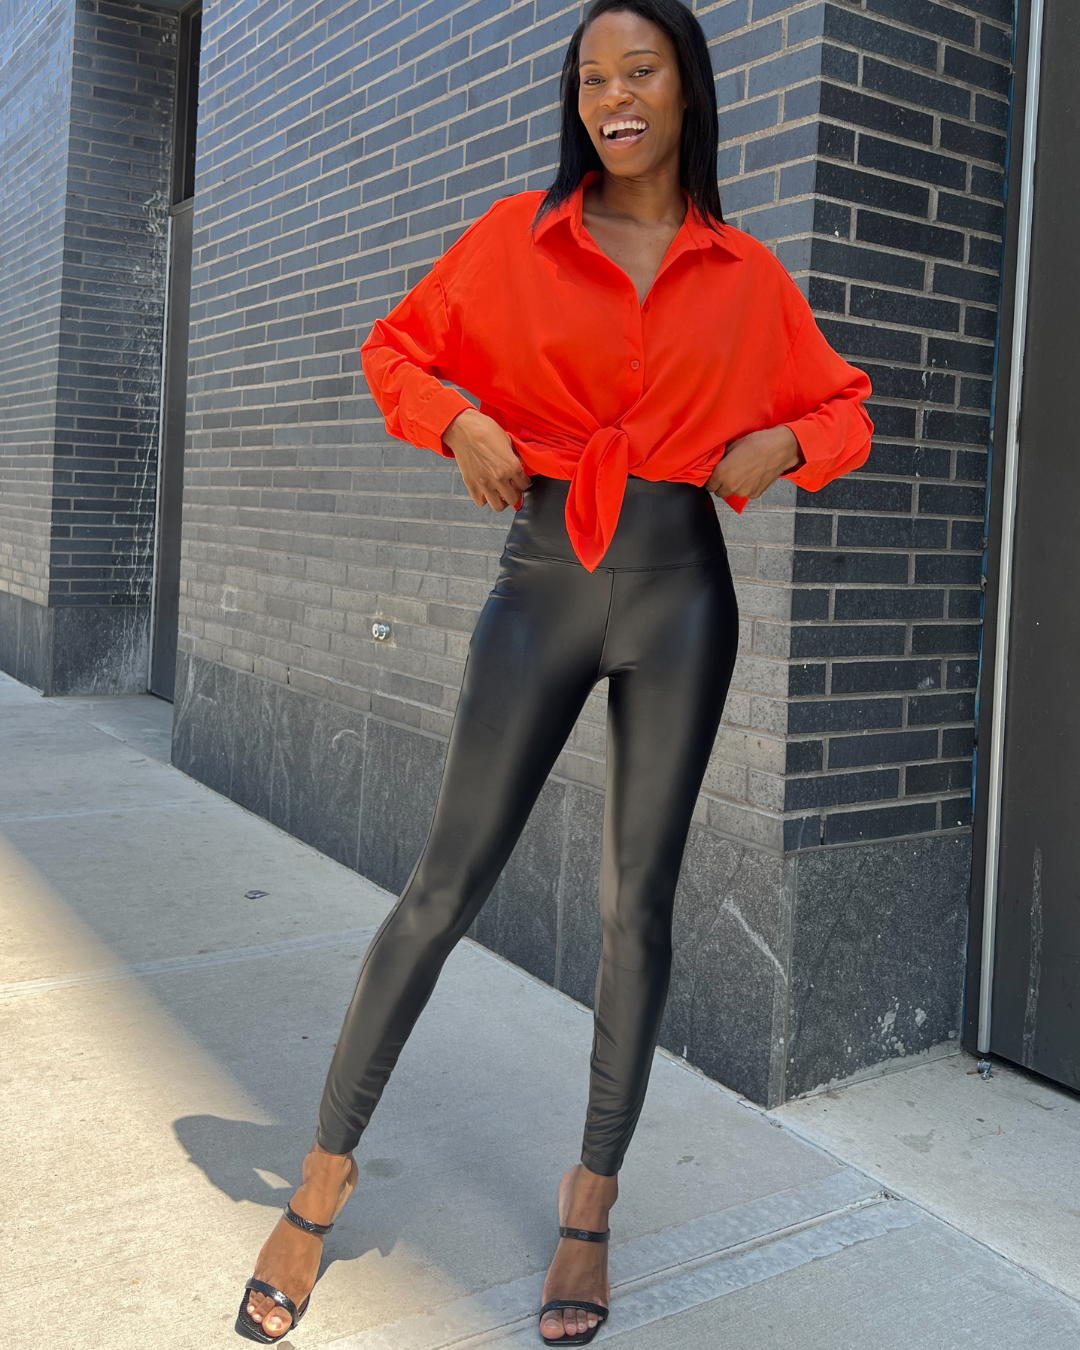 Ultra High-Rise Faux Leather Leggings - The Middle Marketplace